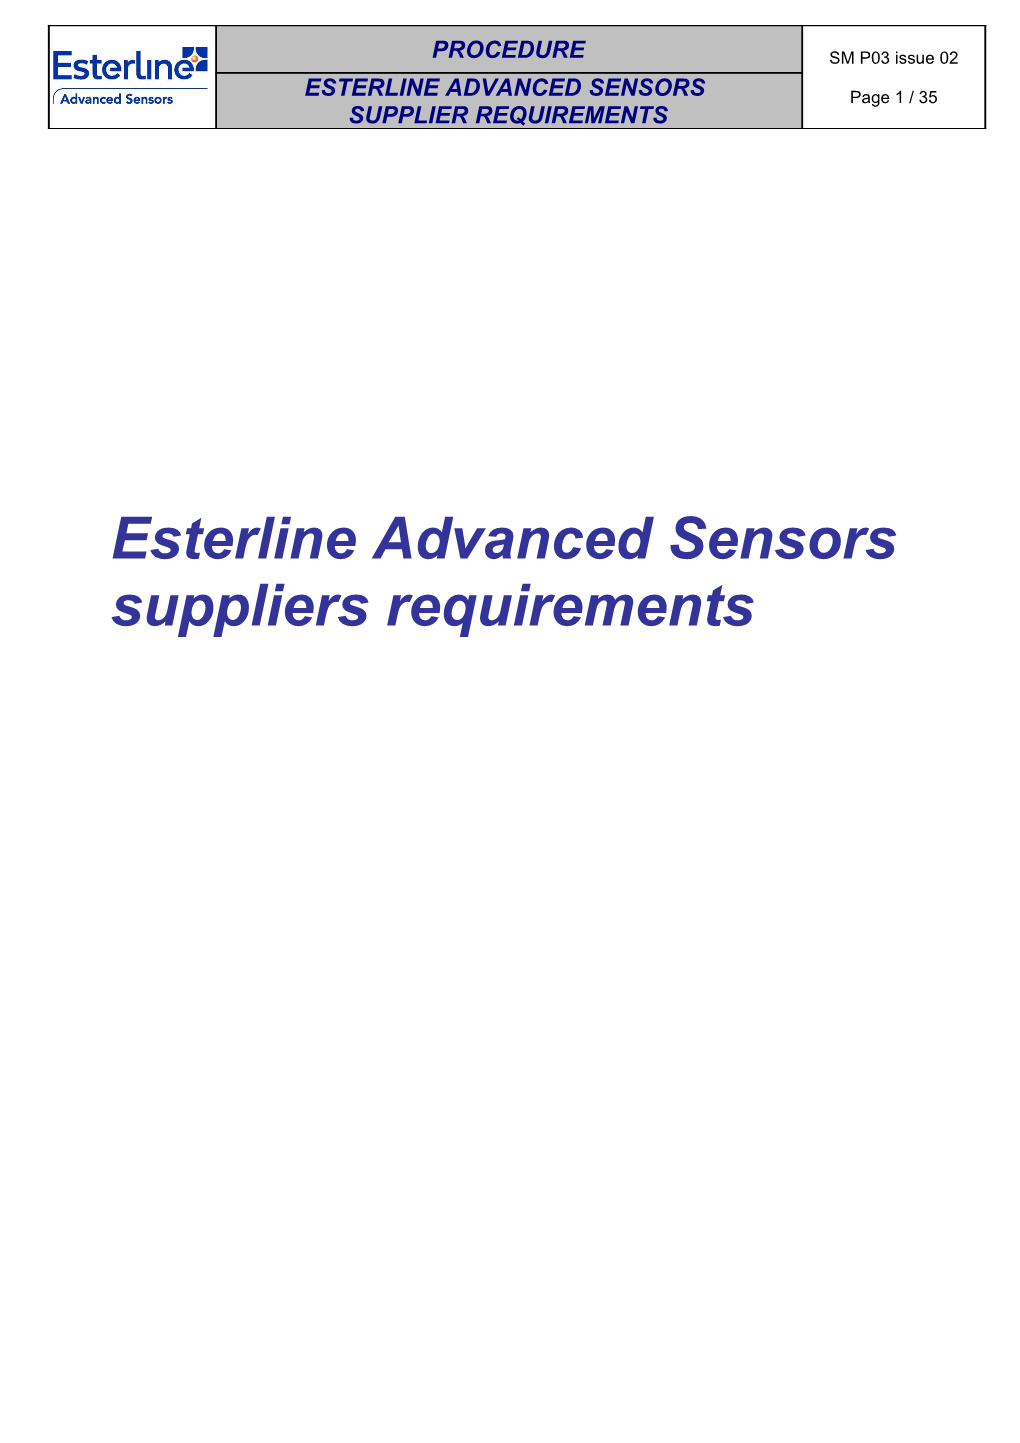 Applicable Requirements To Esterline Advanced Sensors Suppliers.Doc